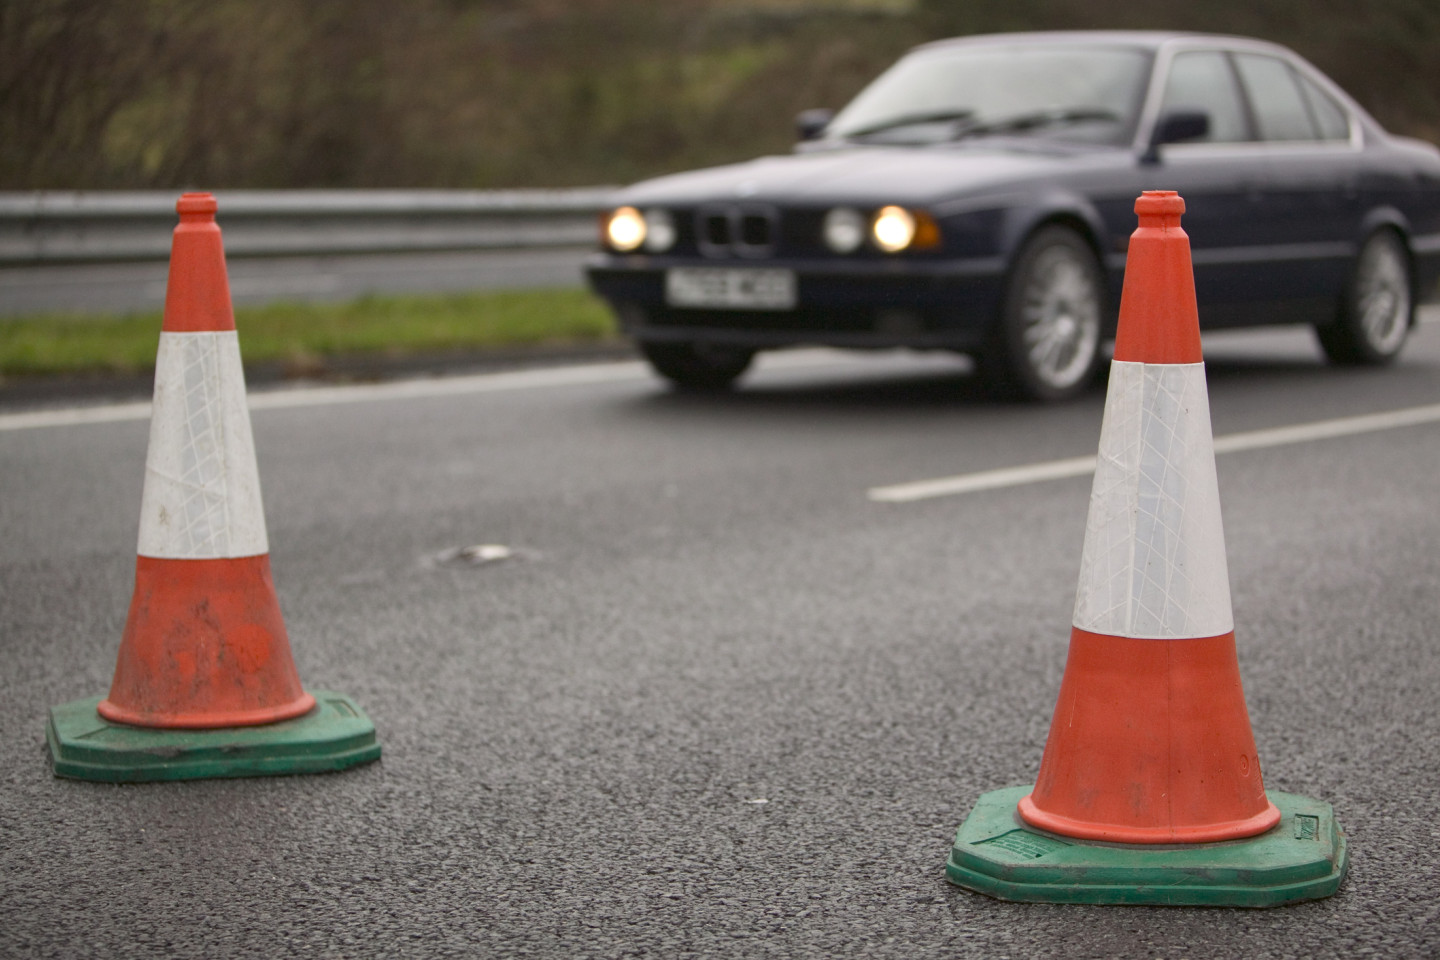 Photo of a car on a road with construction cones.